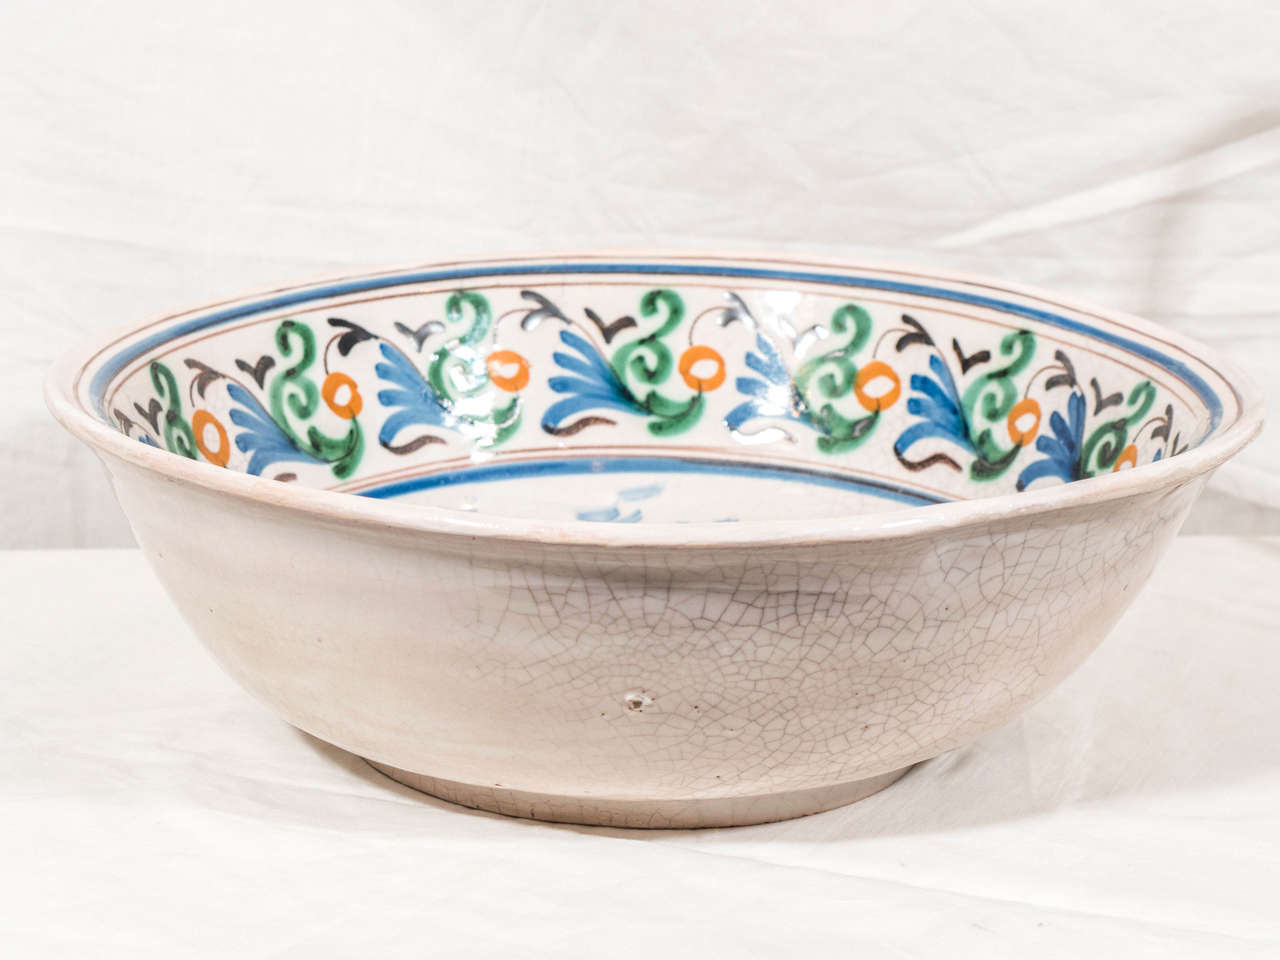 Glazed Antique French Faience Bowl with a Sailing Ship Made circa 1860